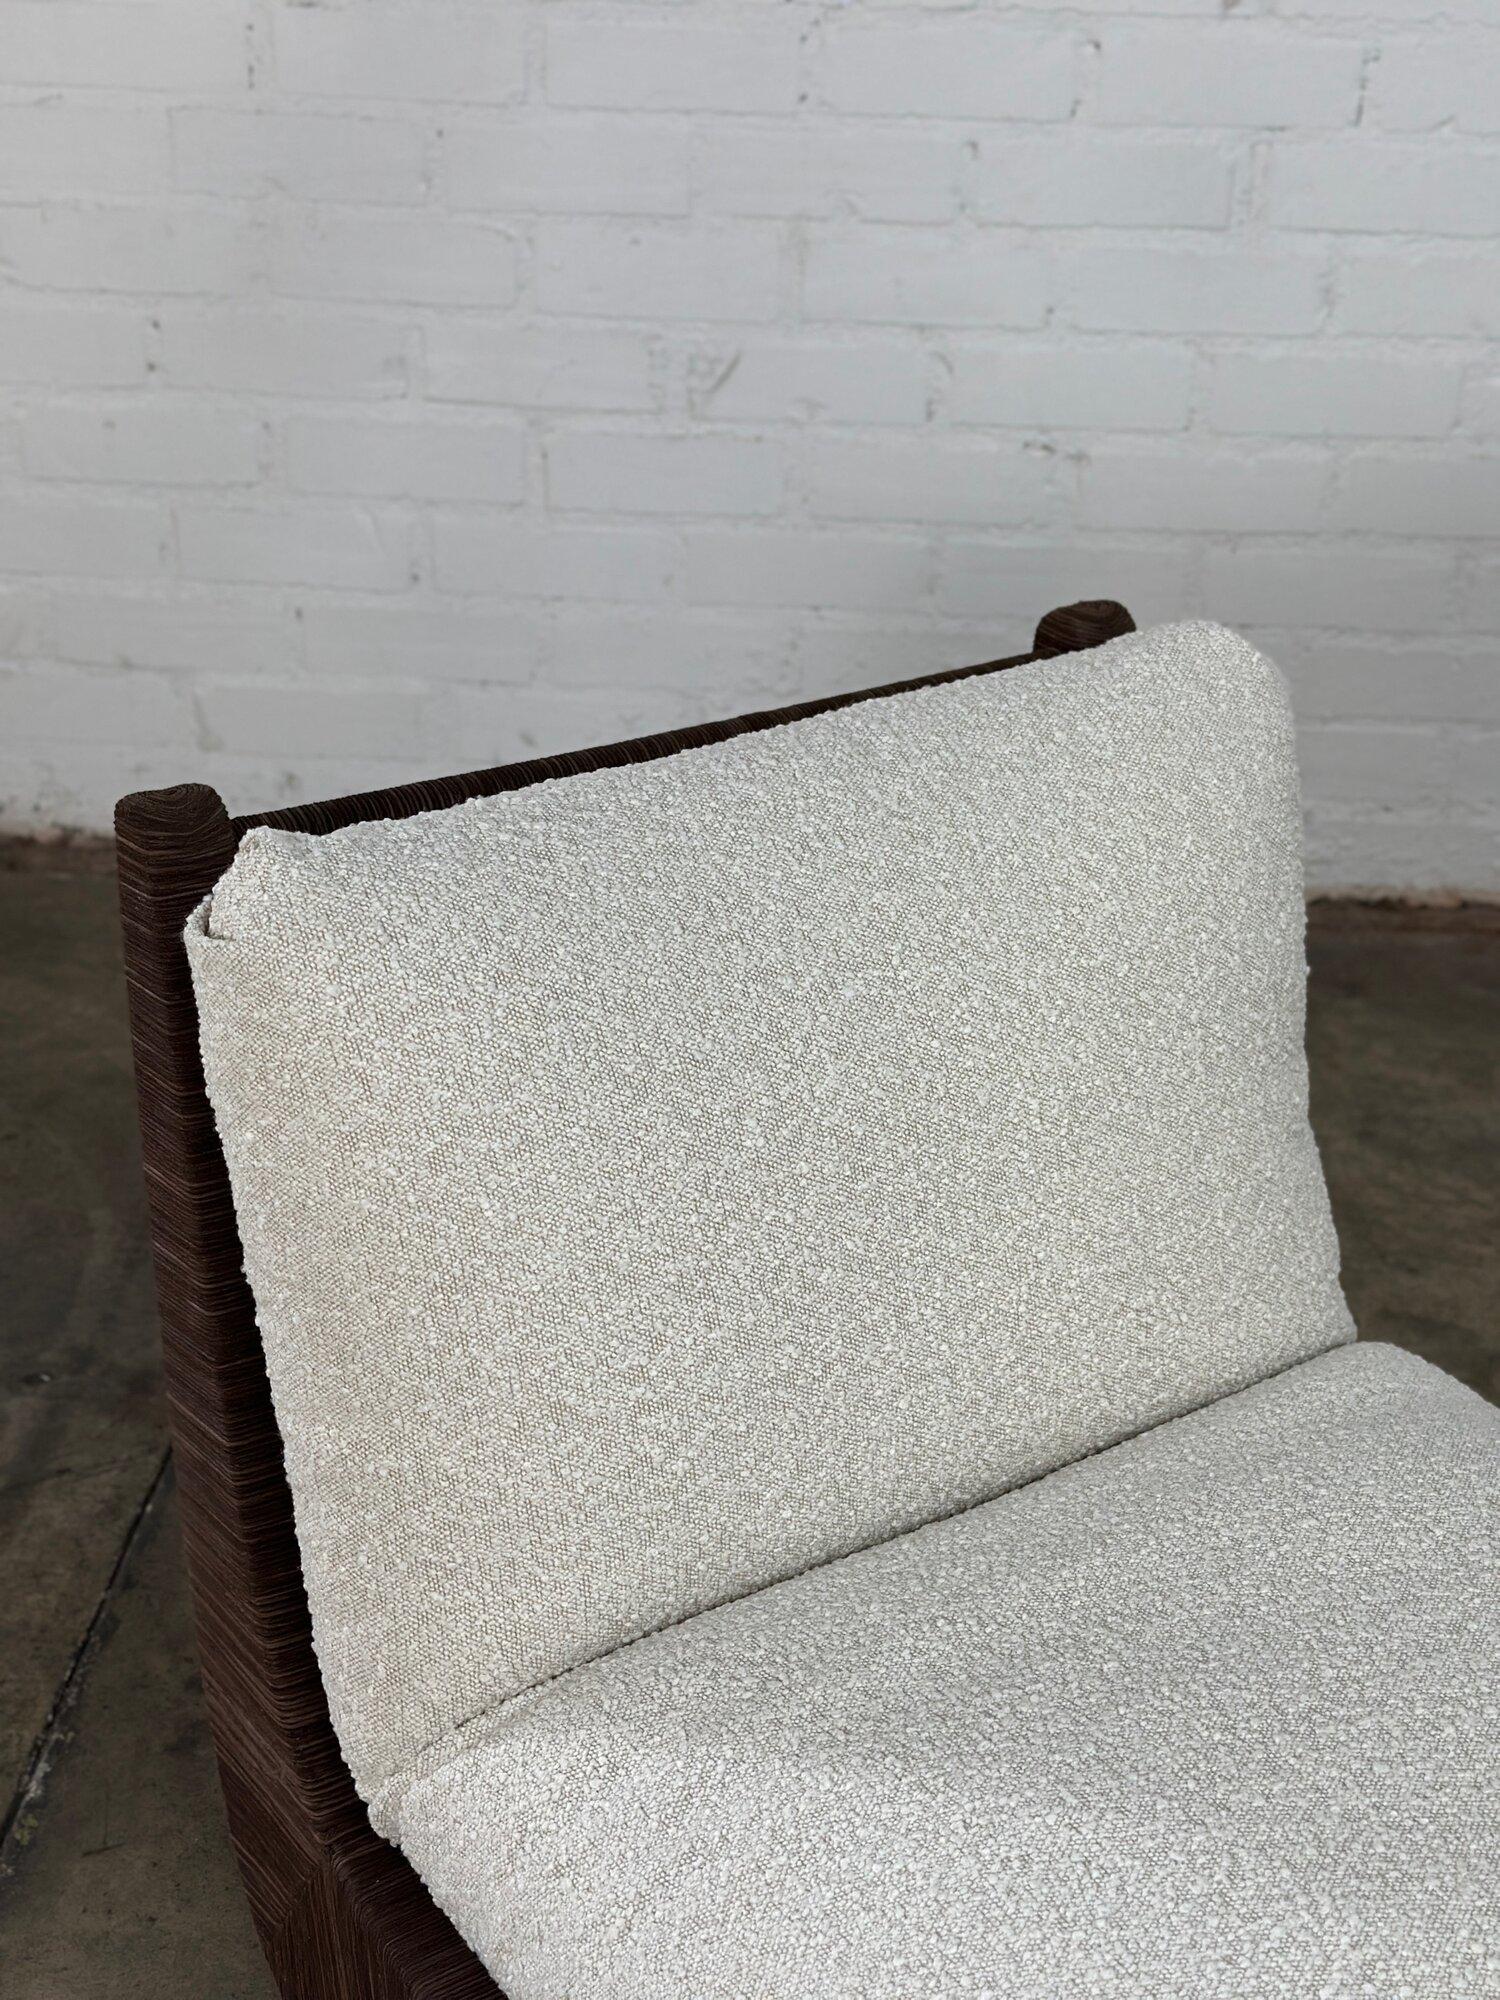 Lashed lounge chair by Baker Furniture In Good Condition For Sale In Los Angeles, CA